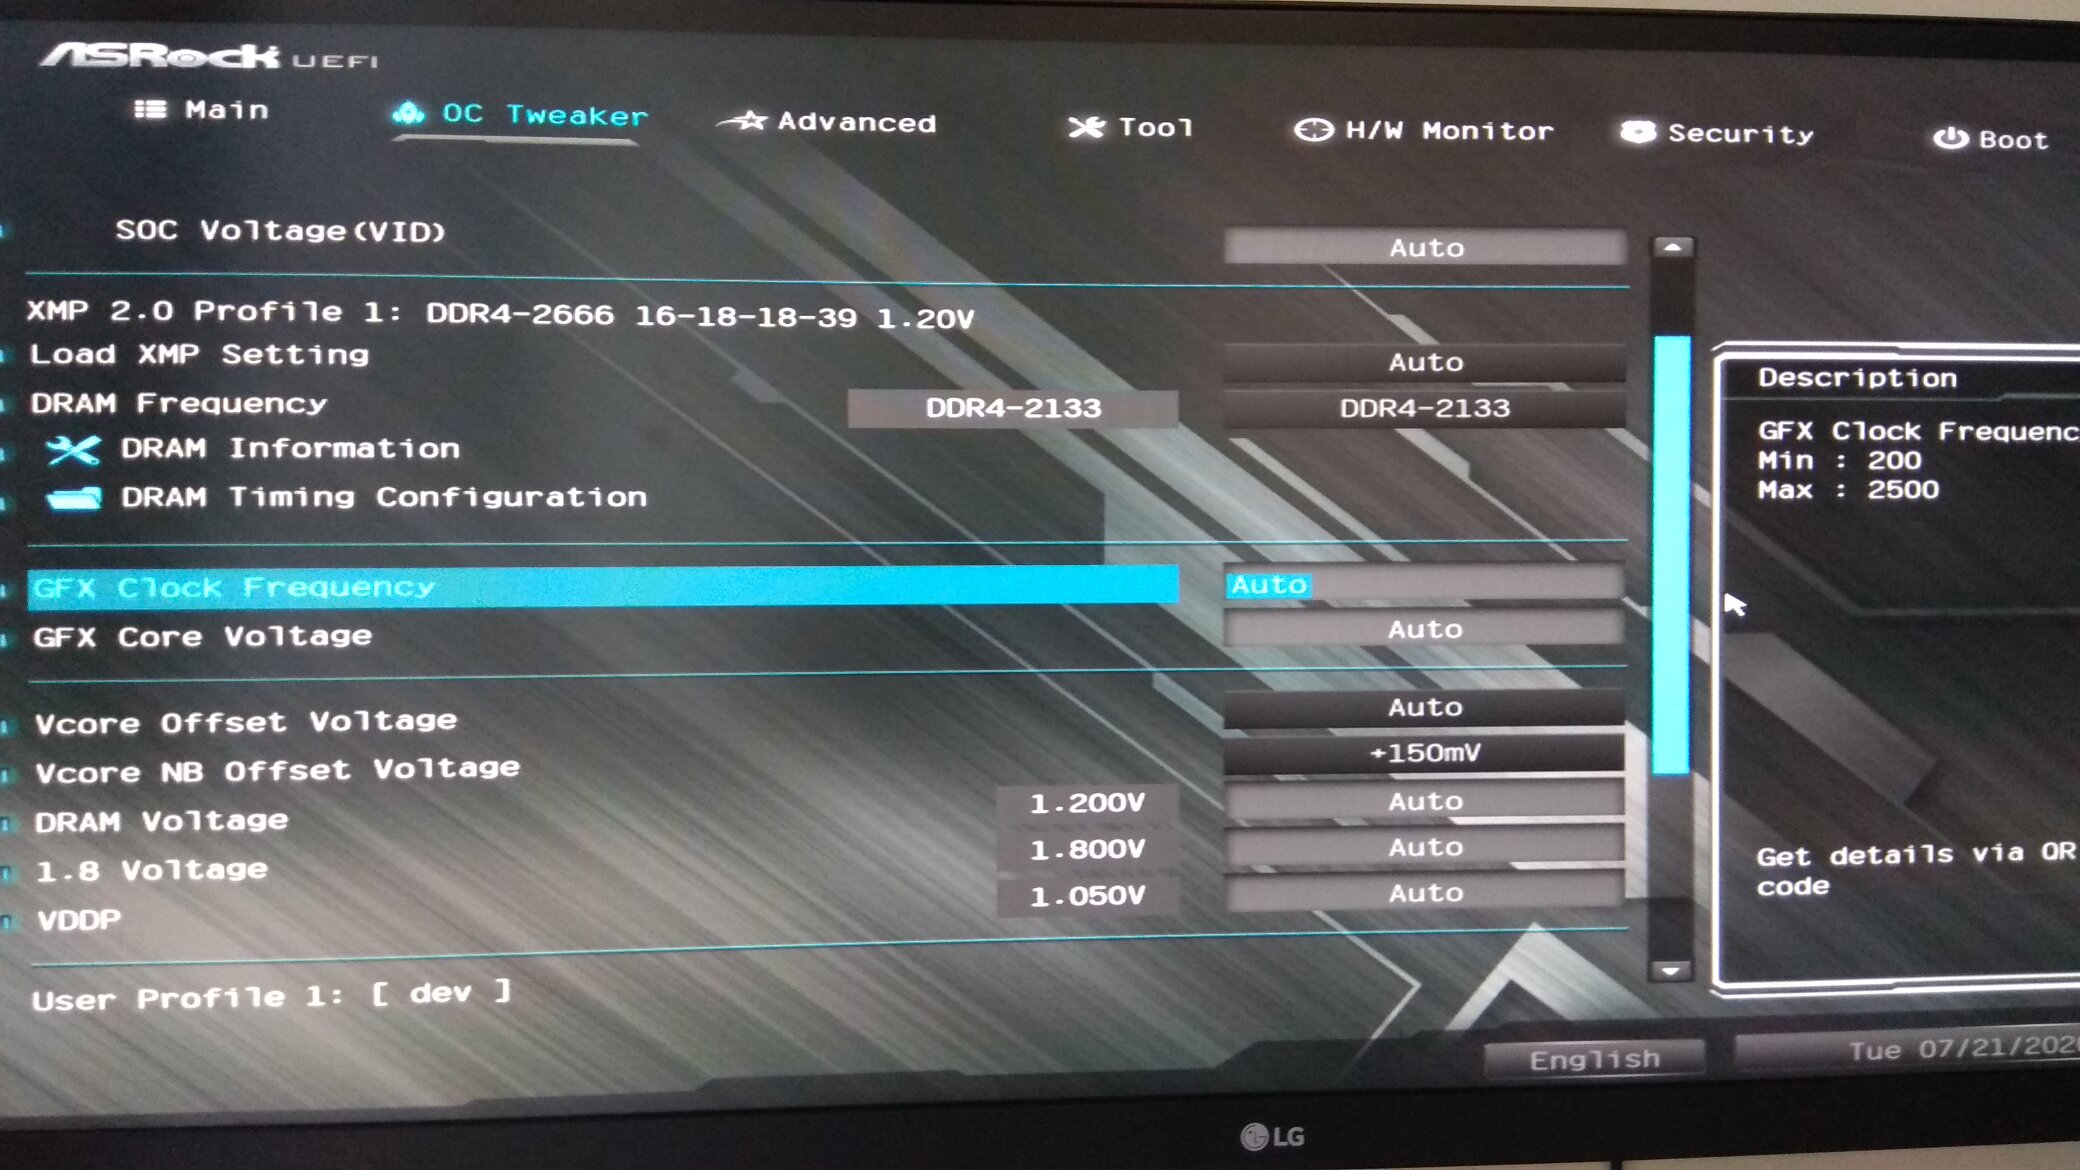 Solved] Can't Asrock B450M Pro4 to post with all memory populated | TechPowerUp Forums